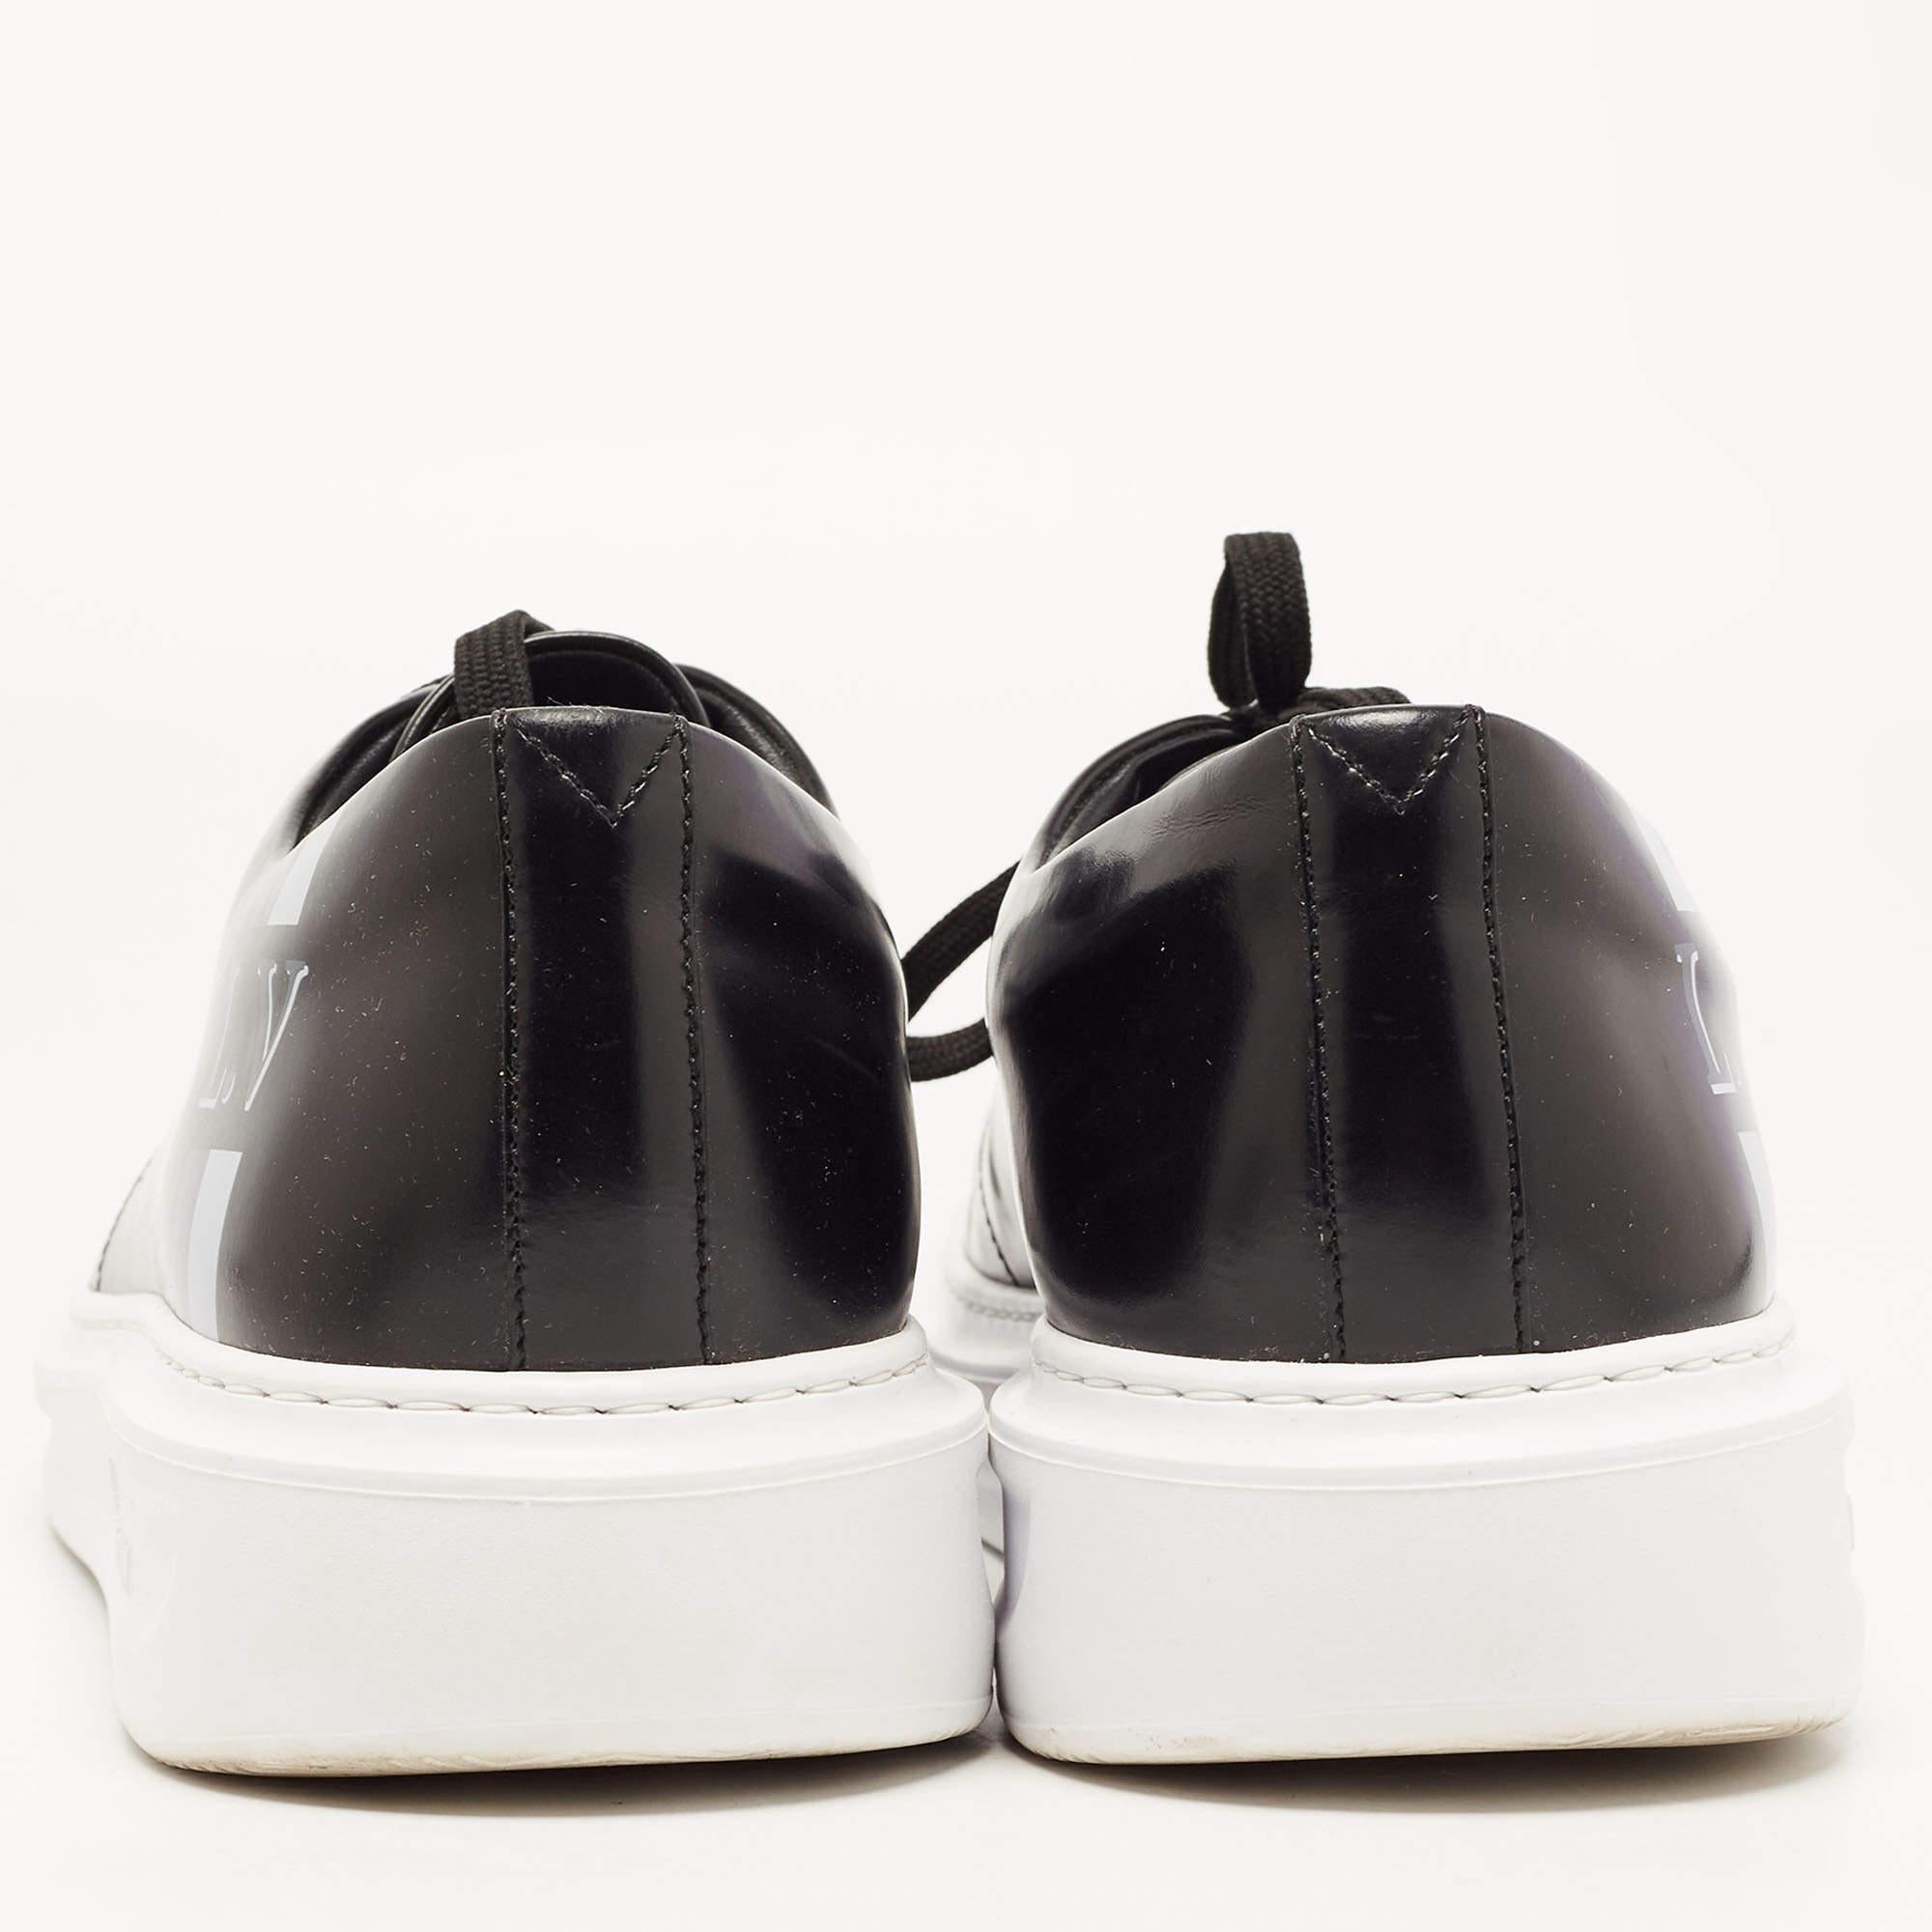 Packed with style and comfort, these Louis Vuitton black sneakers are gentle on the feet so that you can glide through the day. They have a sleek upper with lace closure, and they're set on durable rubber soles.

Includes: Original Box